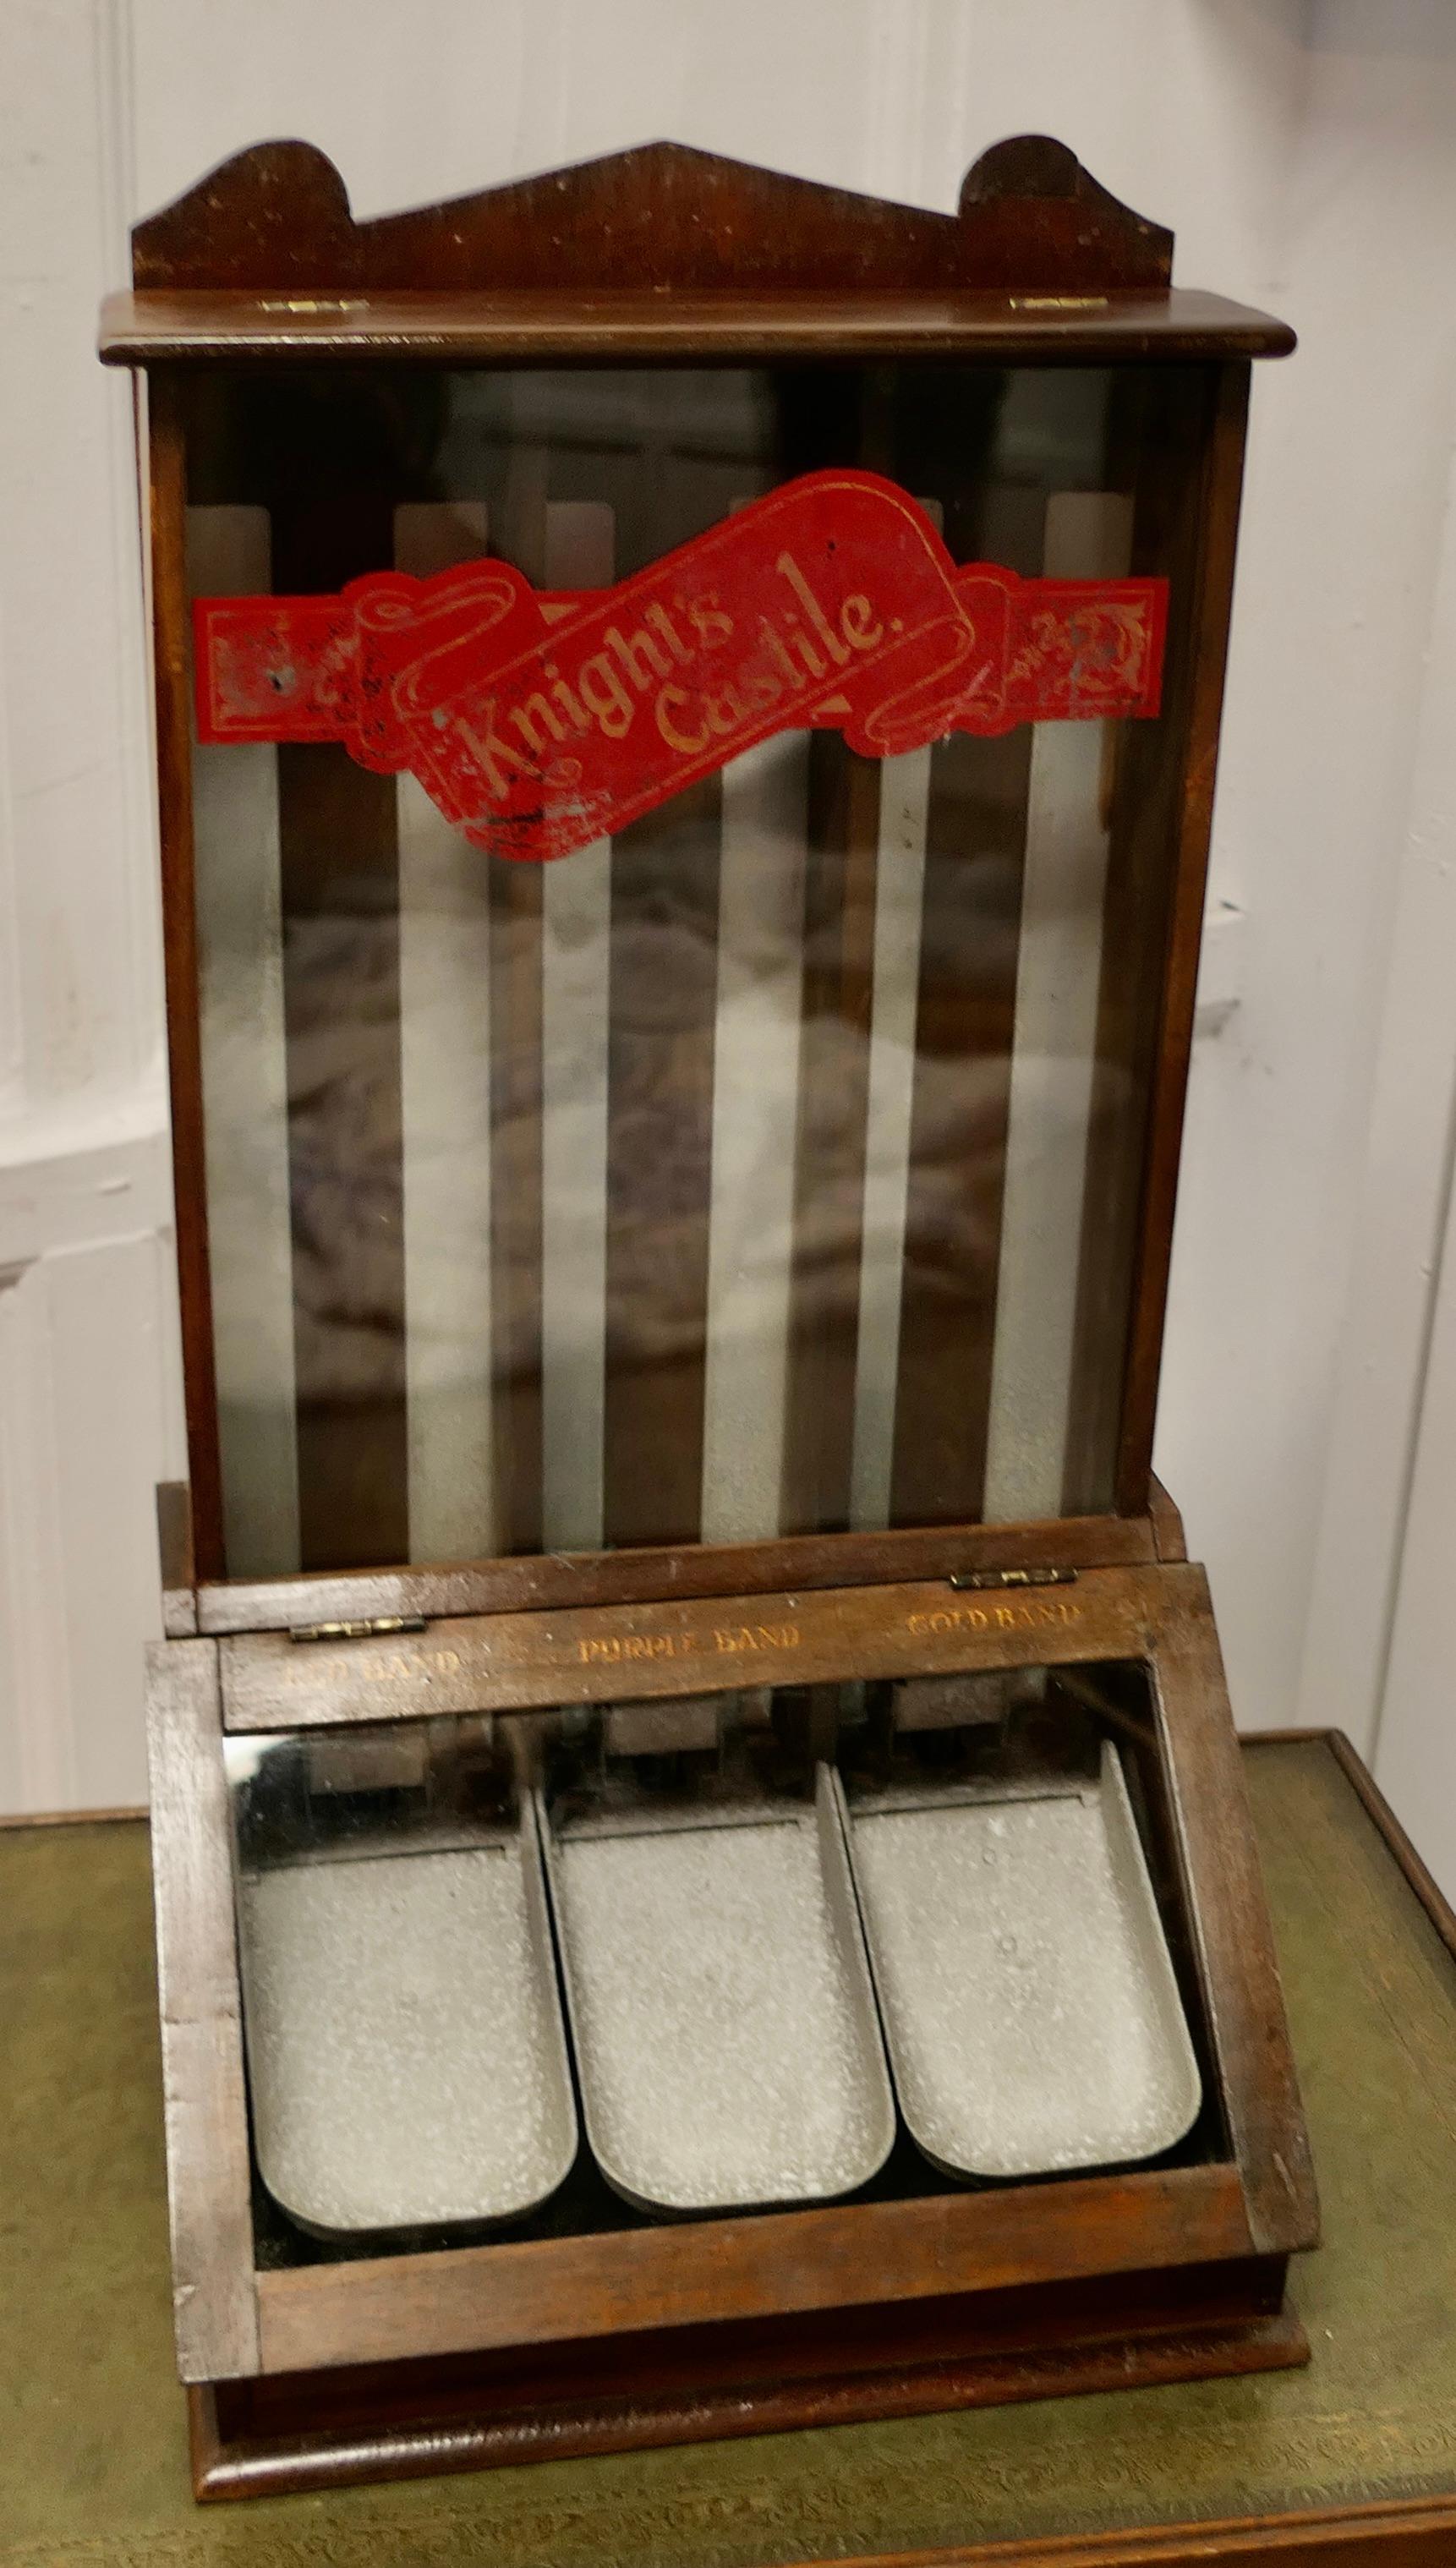 Early 20th Century Knight’s Castile Chemist Shop Display Soap Dispensing Cabinet    For Sale